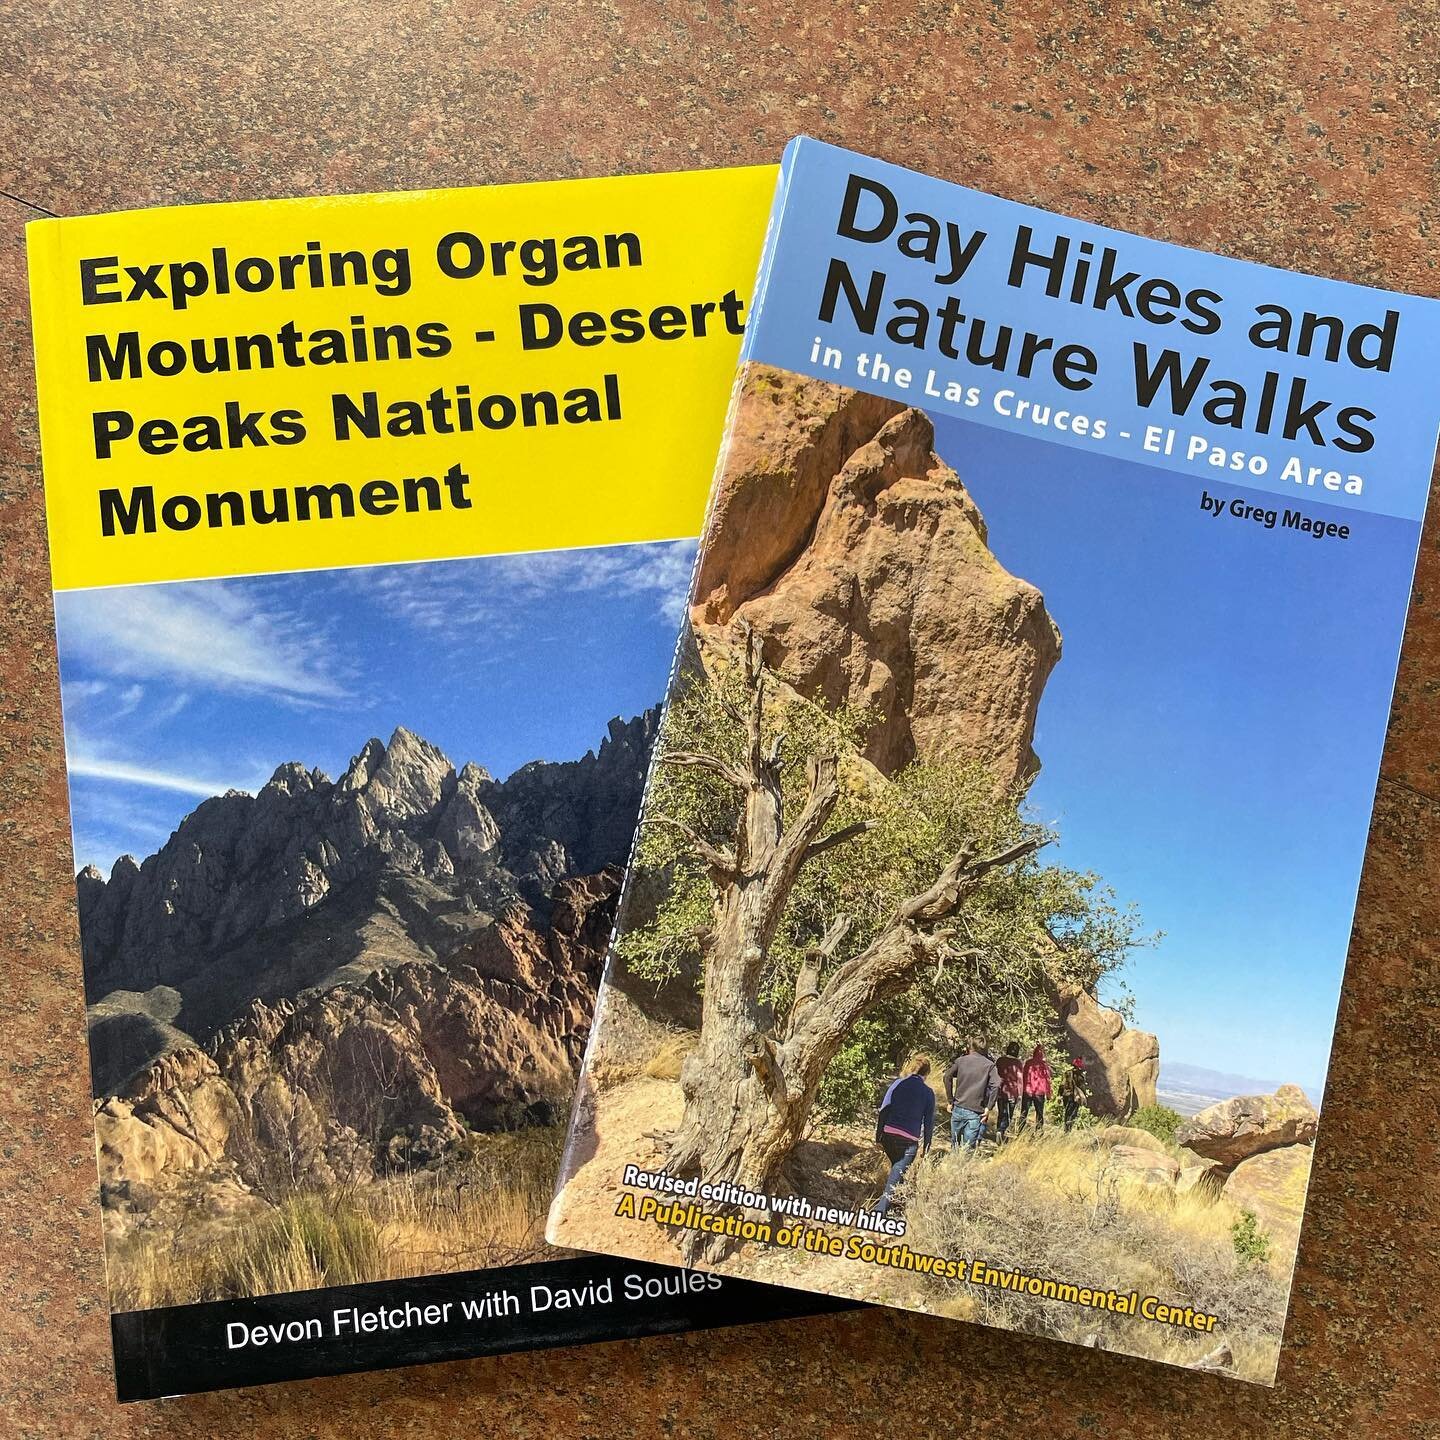 Go Hiking! The weather is beautiful wish you were hiking? 
Hiking guides make it easy. ☀️ 🧢 🗺 
#hikeamountain #hikingtrails👣 #organmountains #coasbookstore #lascruces